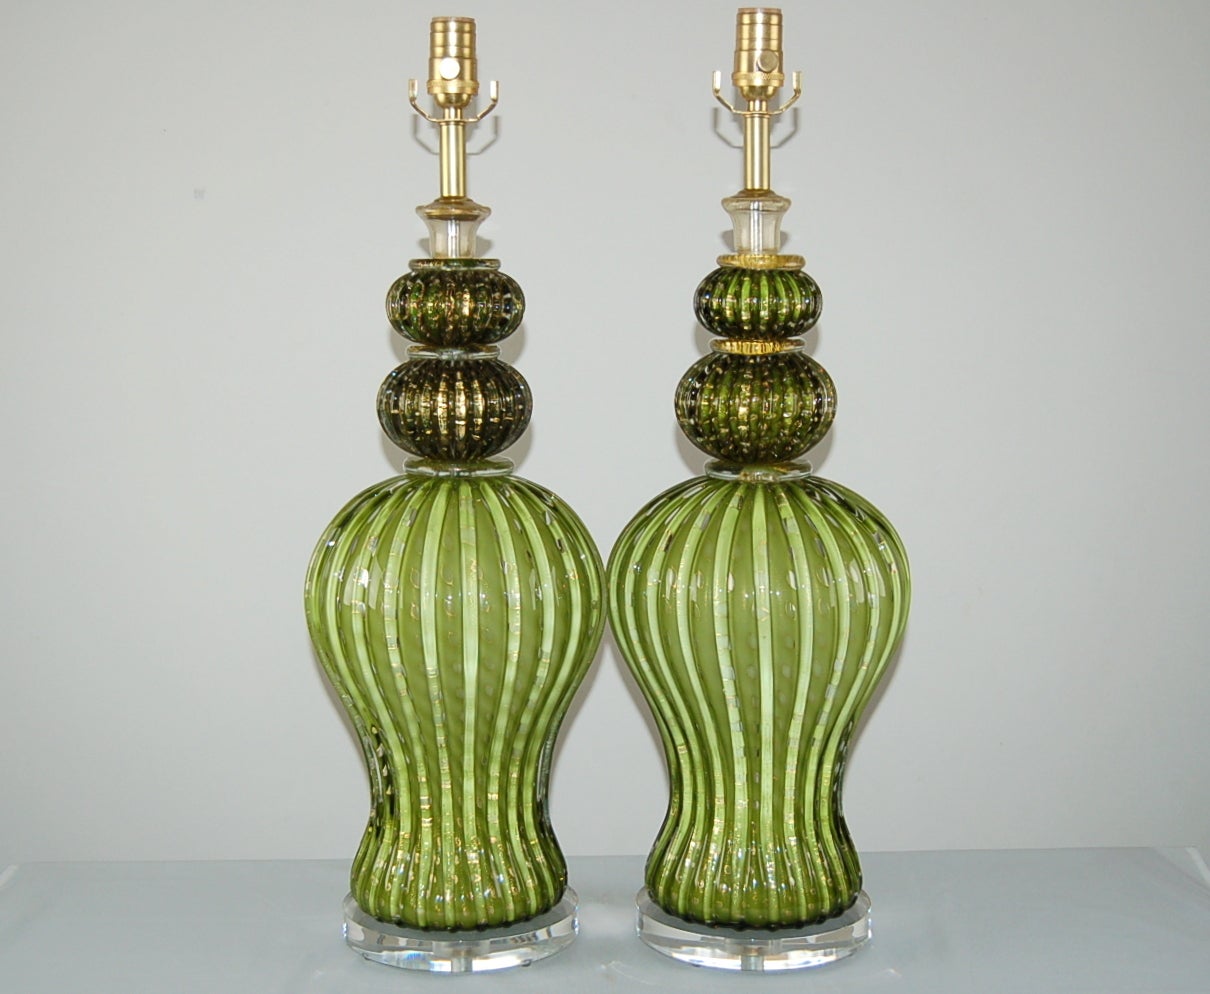 Matched pair of vintage Murano table lamps in a spectacular combination of Hollywood Regency glamour and Barovier & Toso style. Each MOSSY GREEN lamp is filled with controlled bubbles rimmed in GOLD. A very elegant and rare pair!

They stand 27